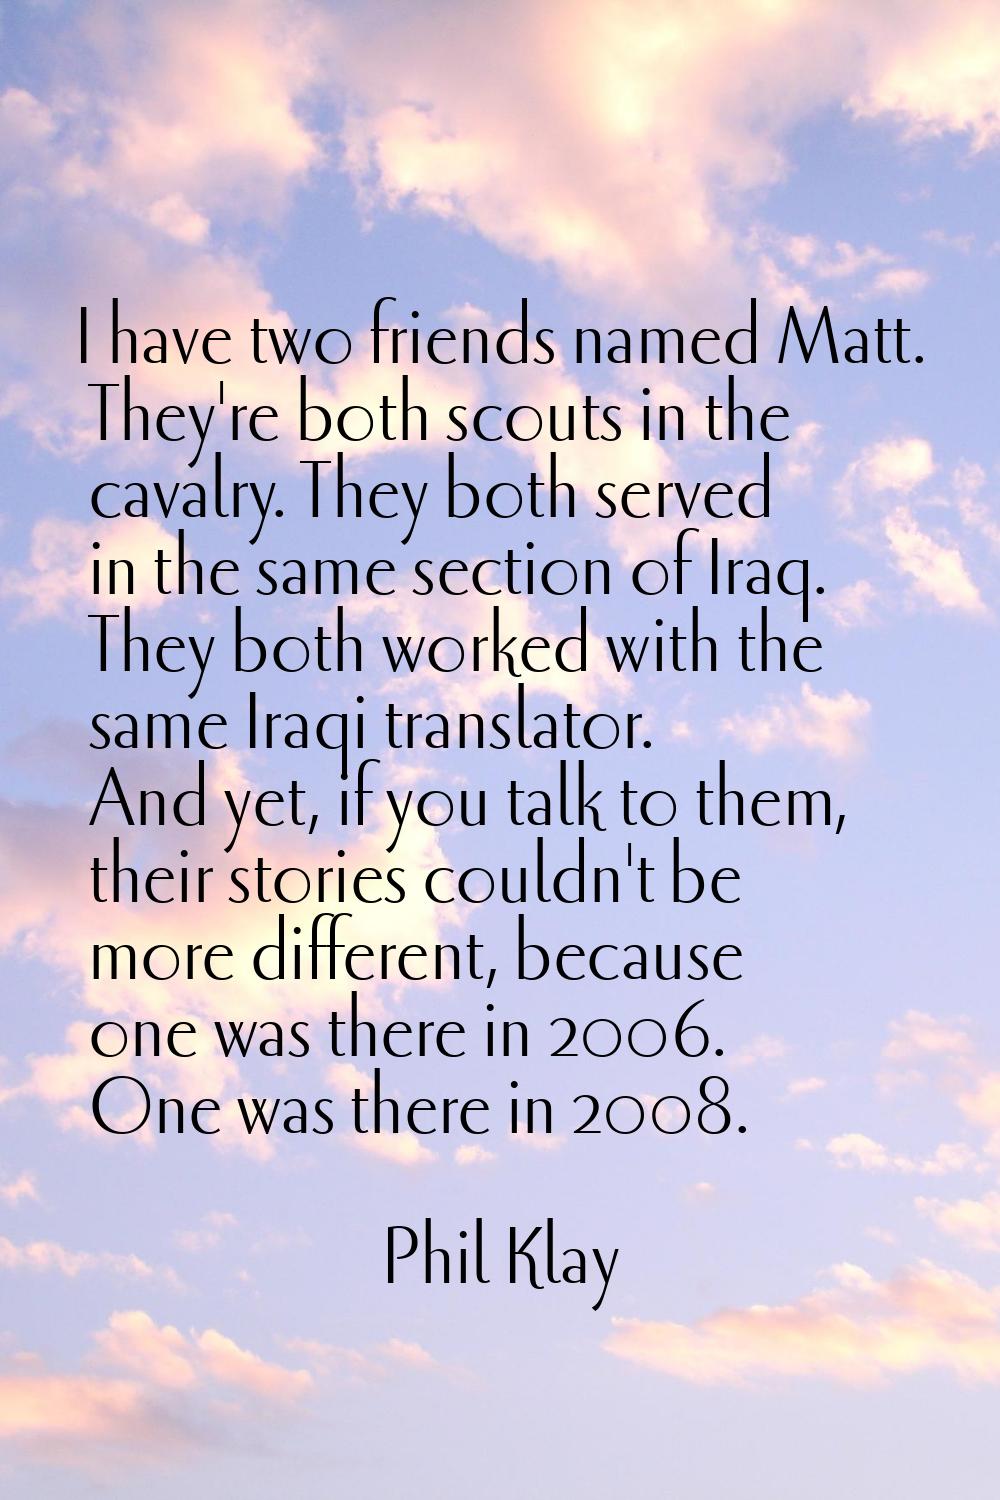 I have two friends named Matt. They're both scouts in the cavalry. They both served in the same sec